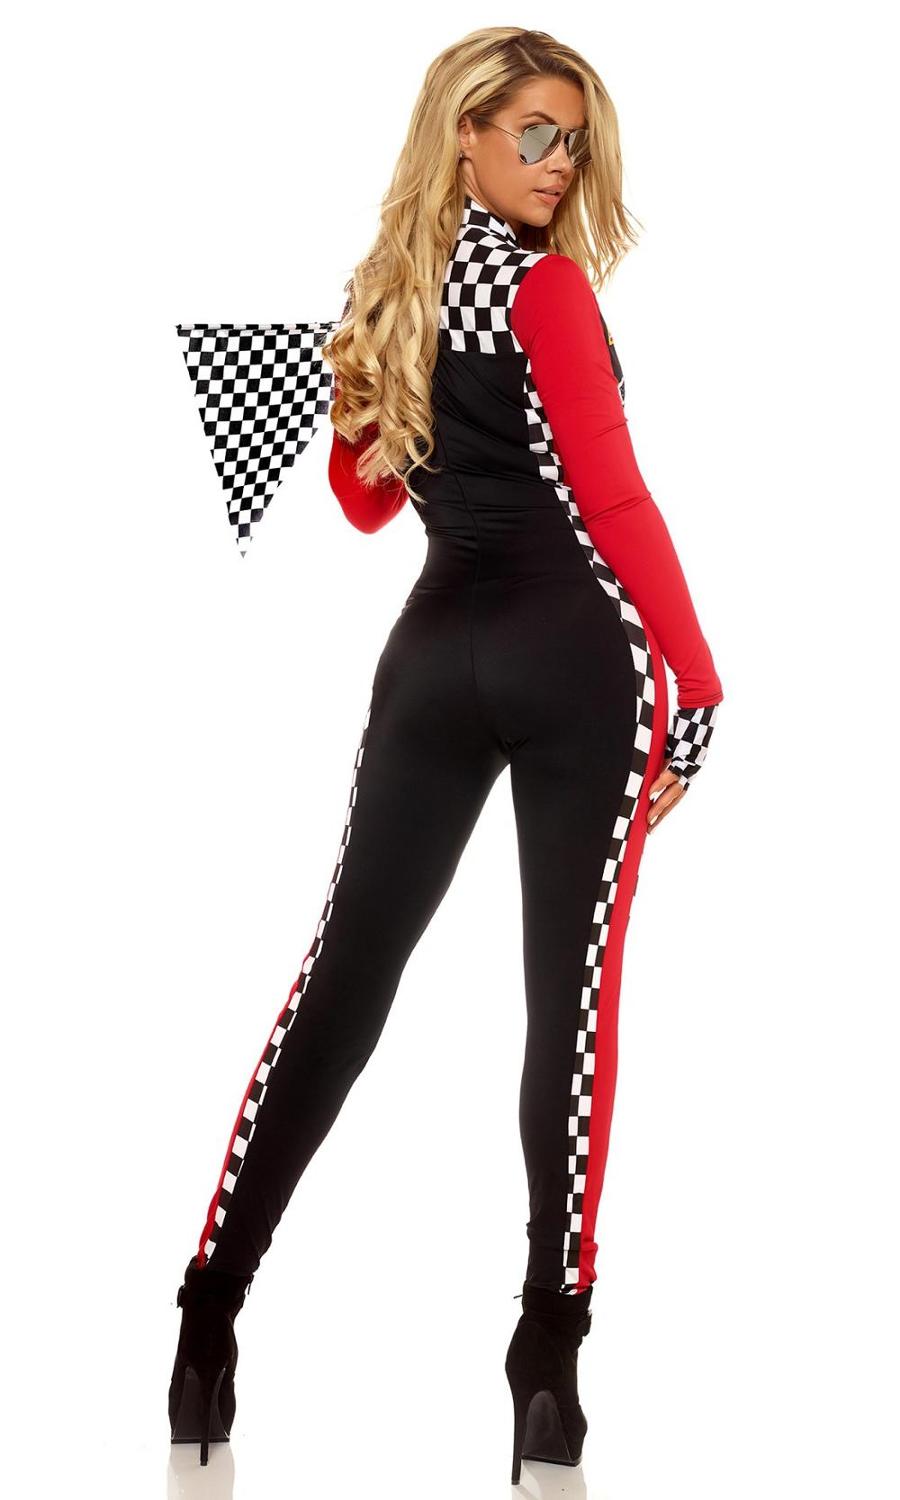 Miss Racer Racing Driver Costume Super Car Grid Girl Fancy Dress Outfit Sexy Jumpsuit